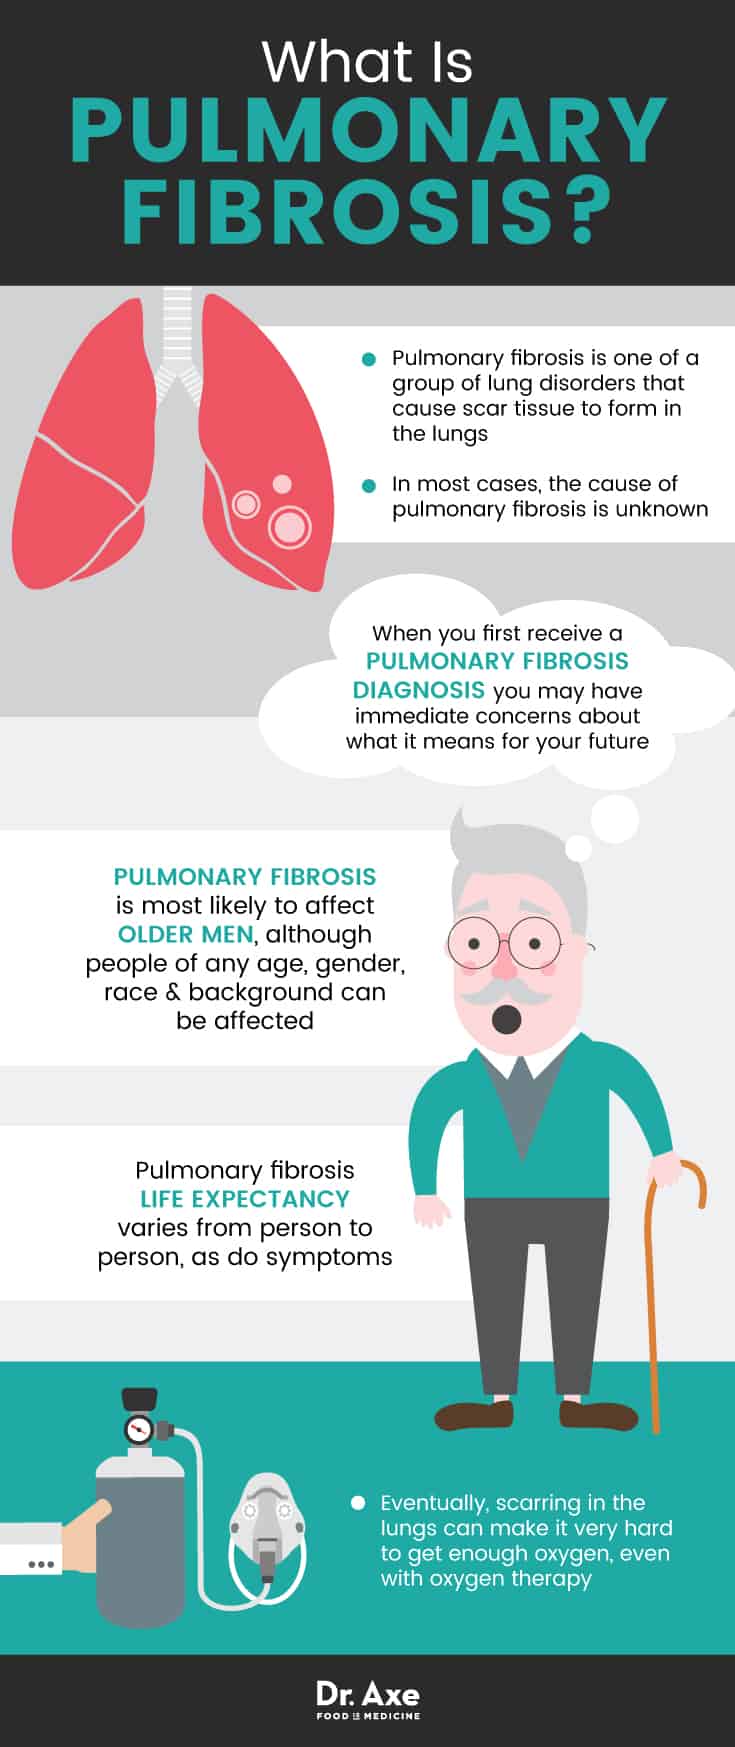 What is pulmonary fibrosis? - Dr. Axe